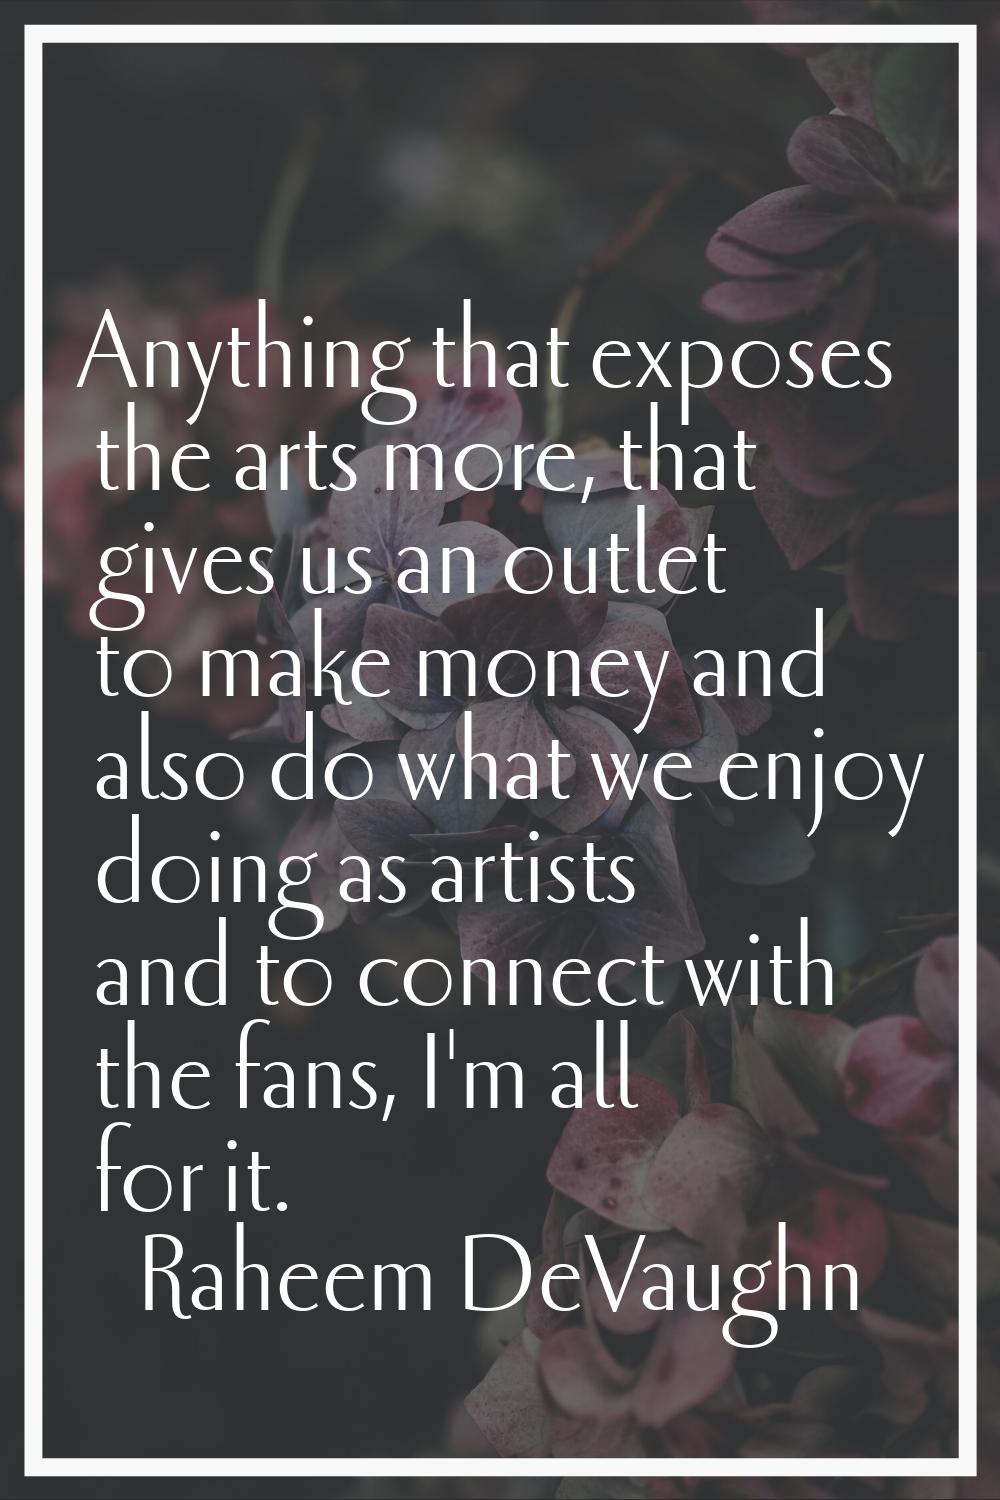 Anything that exposes the arts more, that gives us an outlet to make money and also do what we enjo